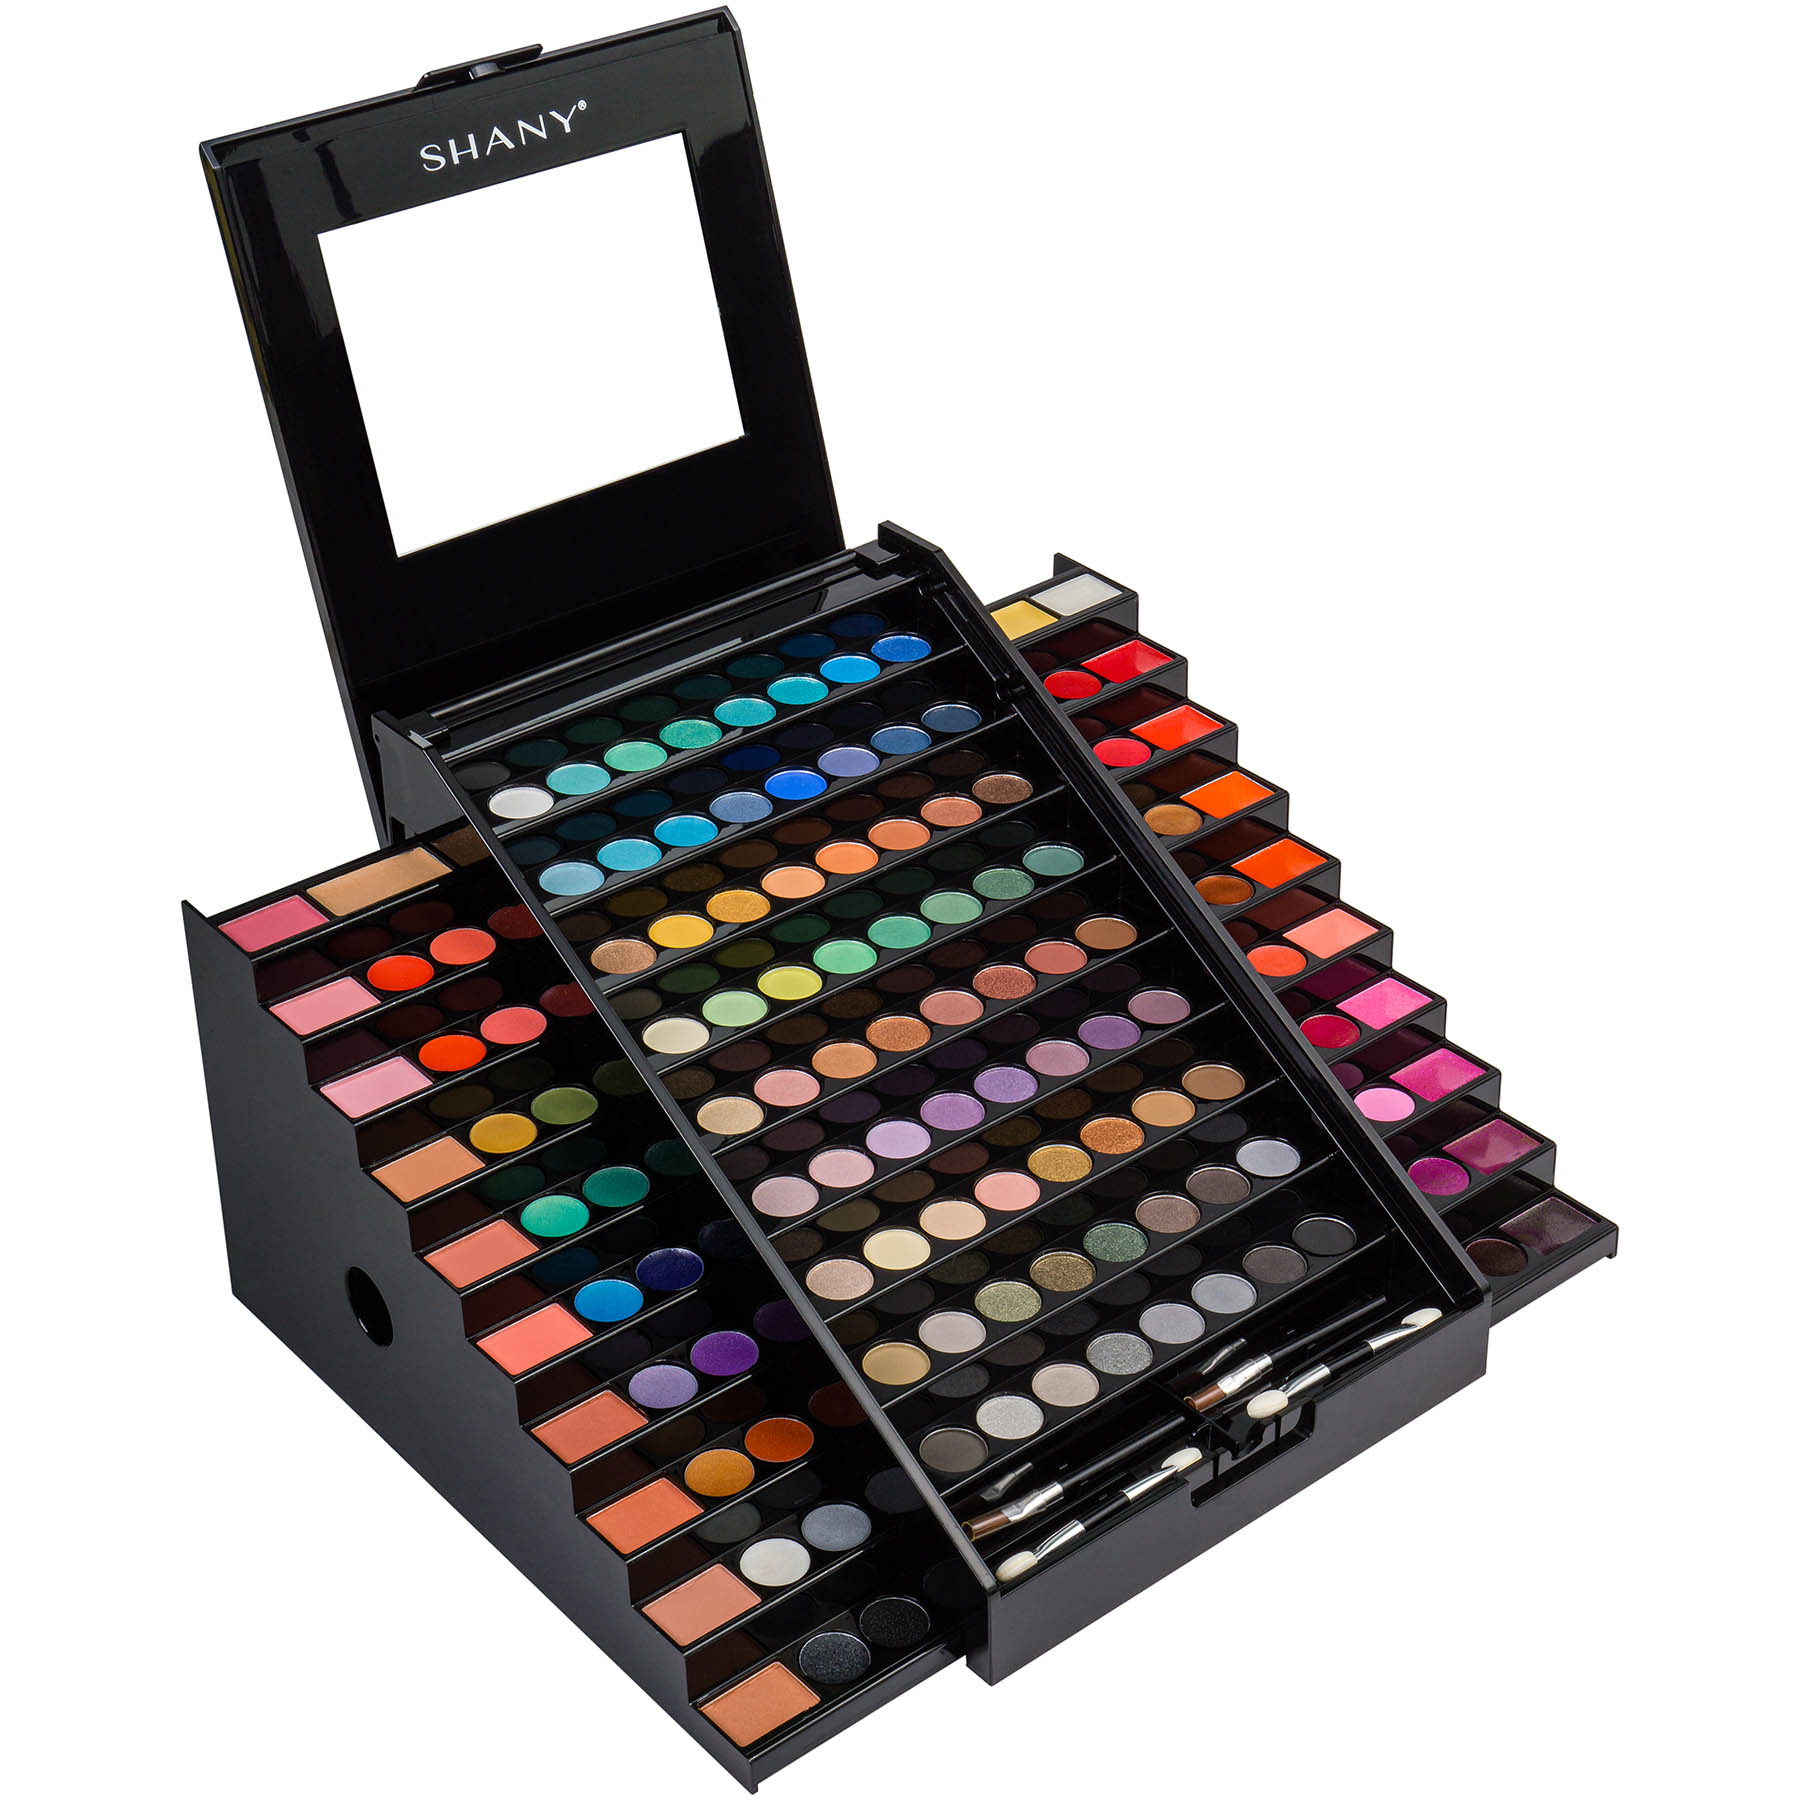 SHANY Elevated Essentials Makeup Set - All-in-One Makeup Kit with 72  Eyeshadows, 28 Lip Colors, 18 Gel Eyeliners, 10 Blushes, 1 Eye Primer, and  1 Cream Concealer 